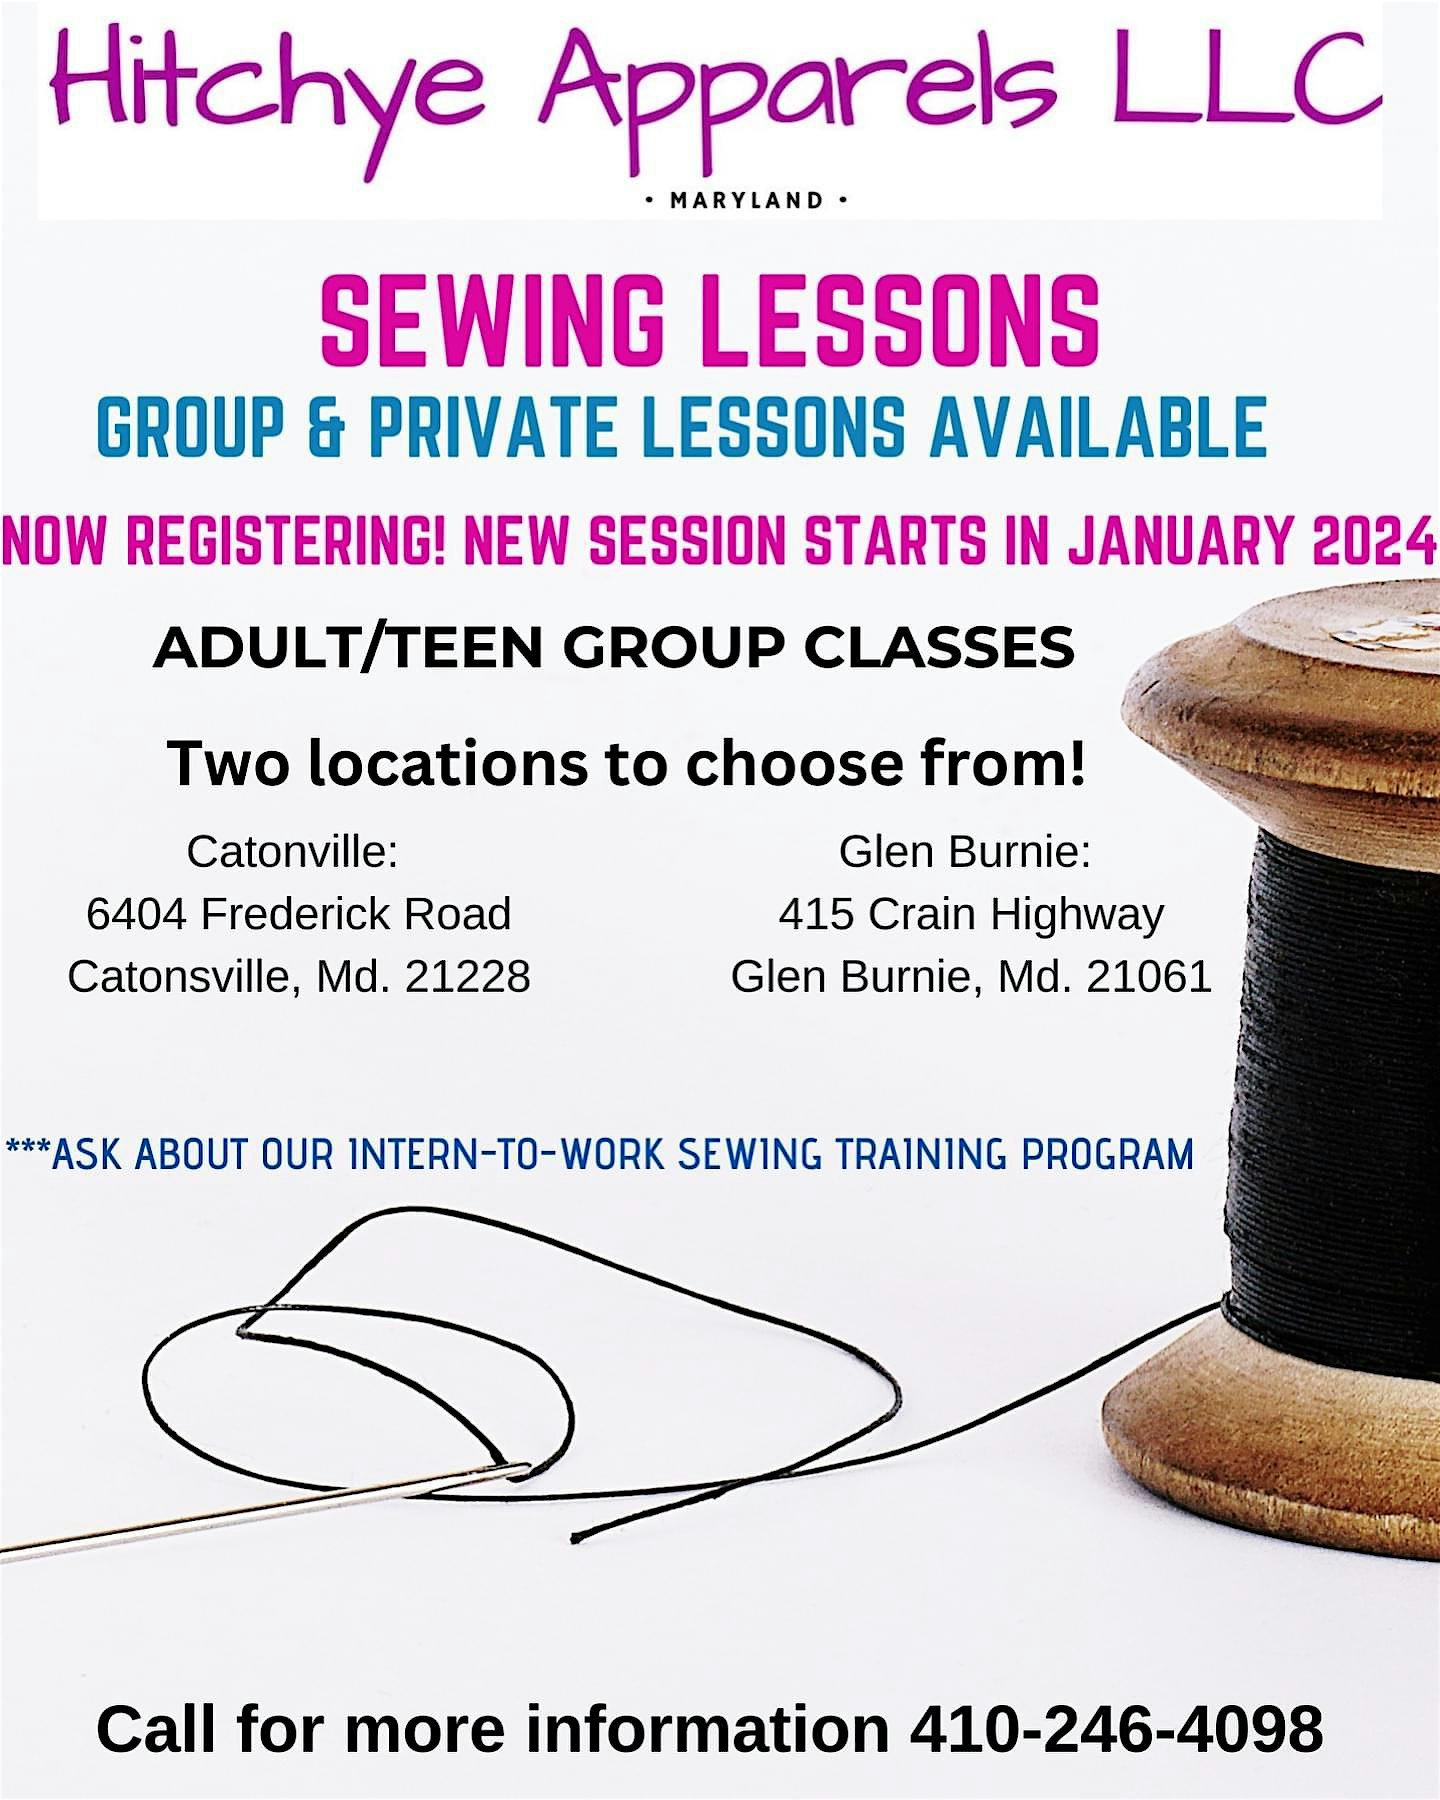 Sewing lessons for Adults\/Teens!